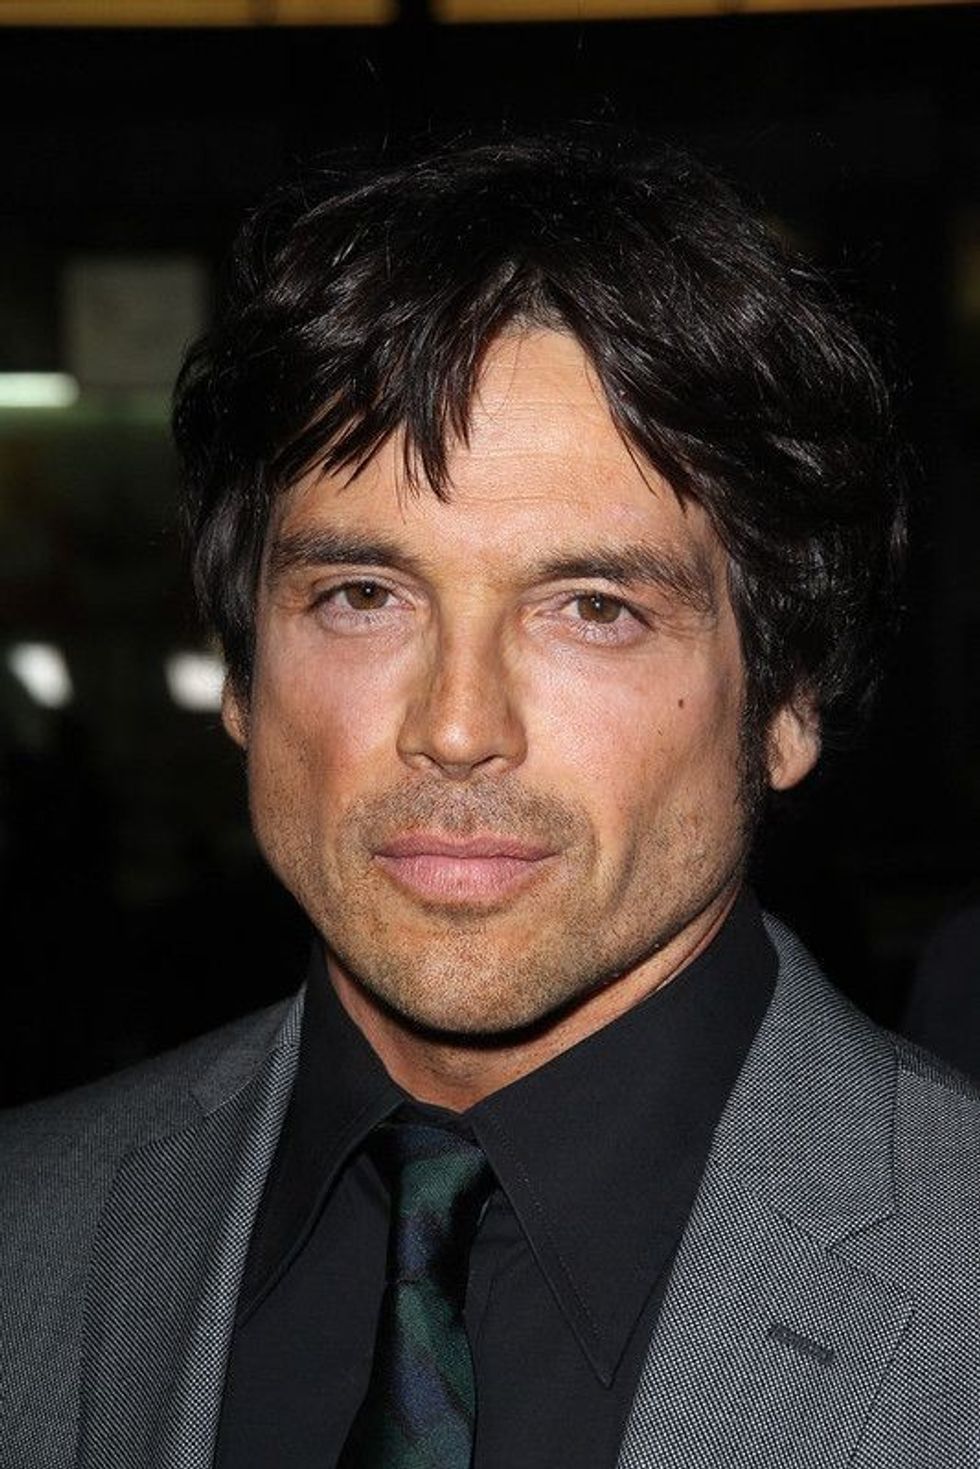 Read these Jason Gedrick facts to learn more about the television series this actor, born in February, has acted.